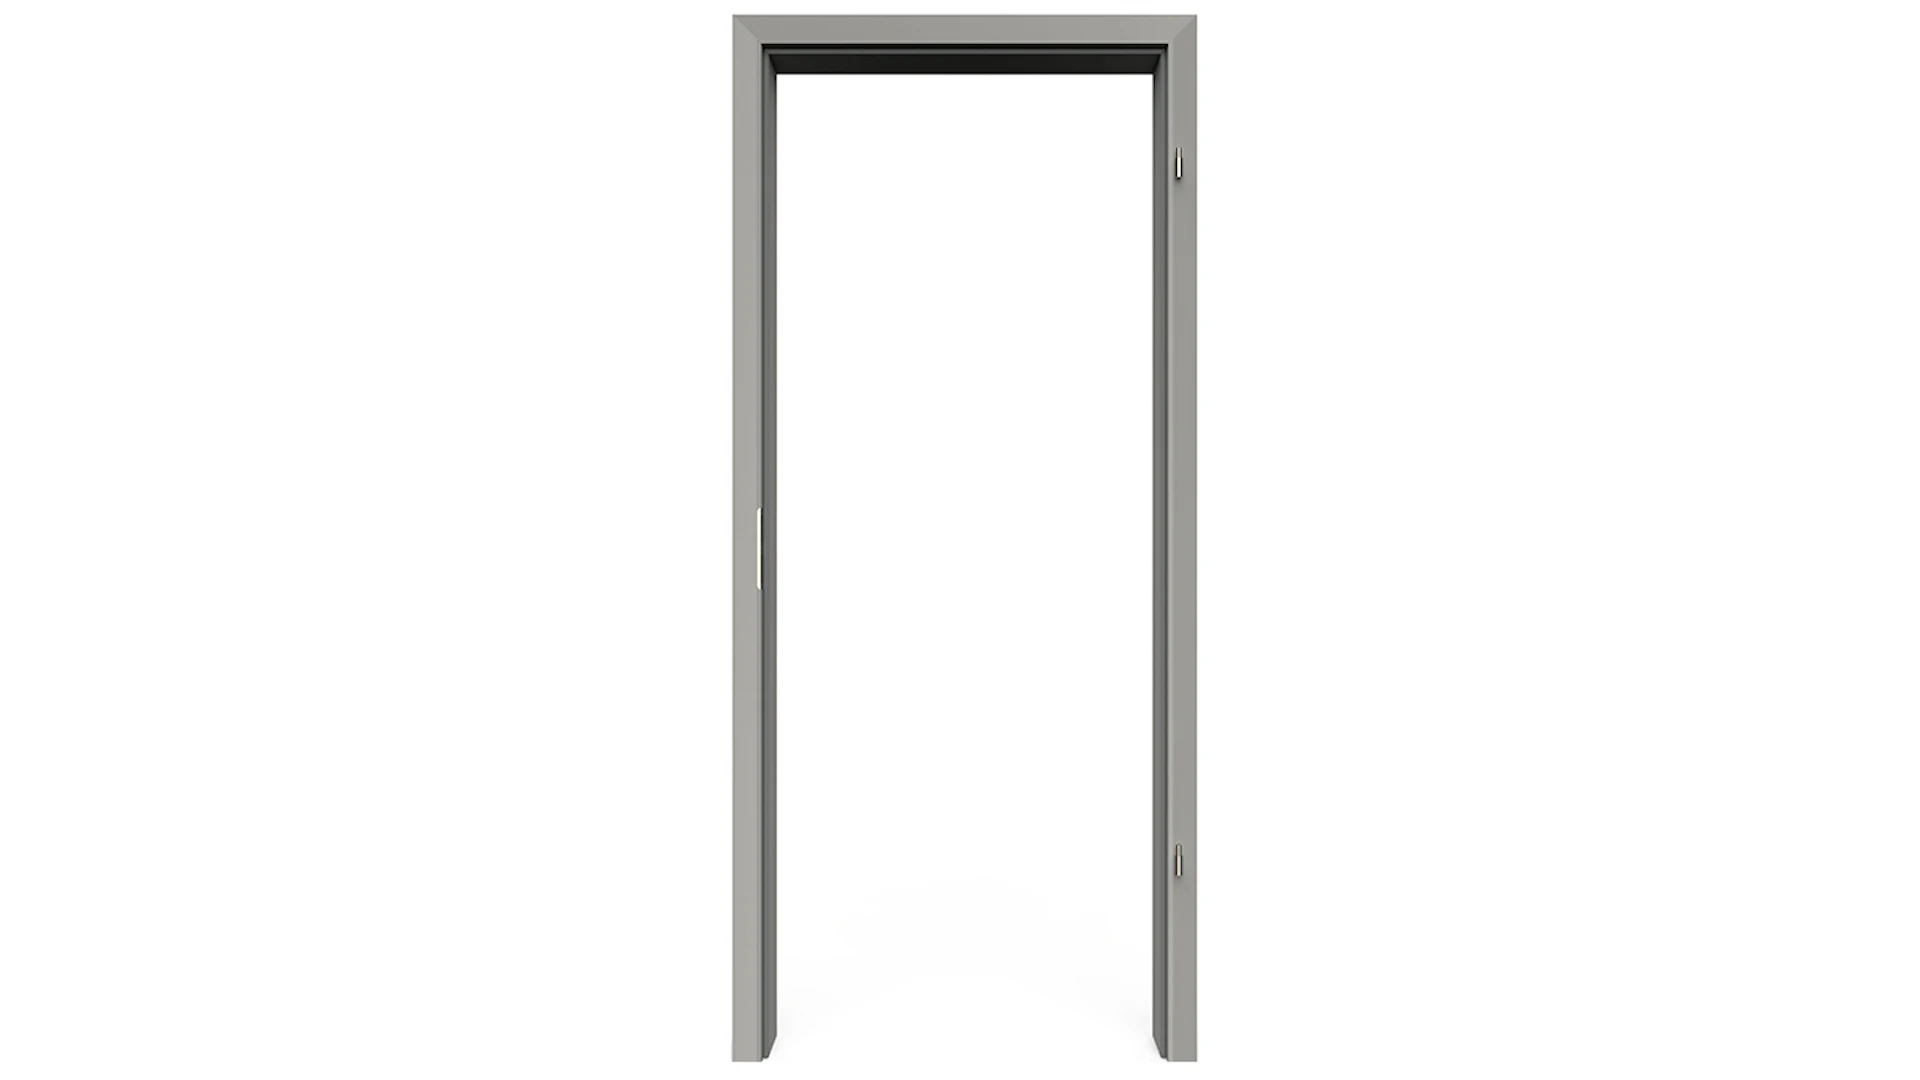 planeo Standard Door frame, rounded edge - CPL Silver grey - 2110 x 860 x 260 mm DIN Right